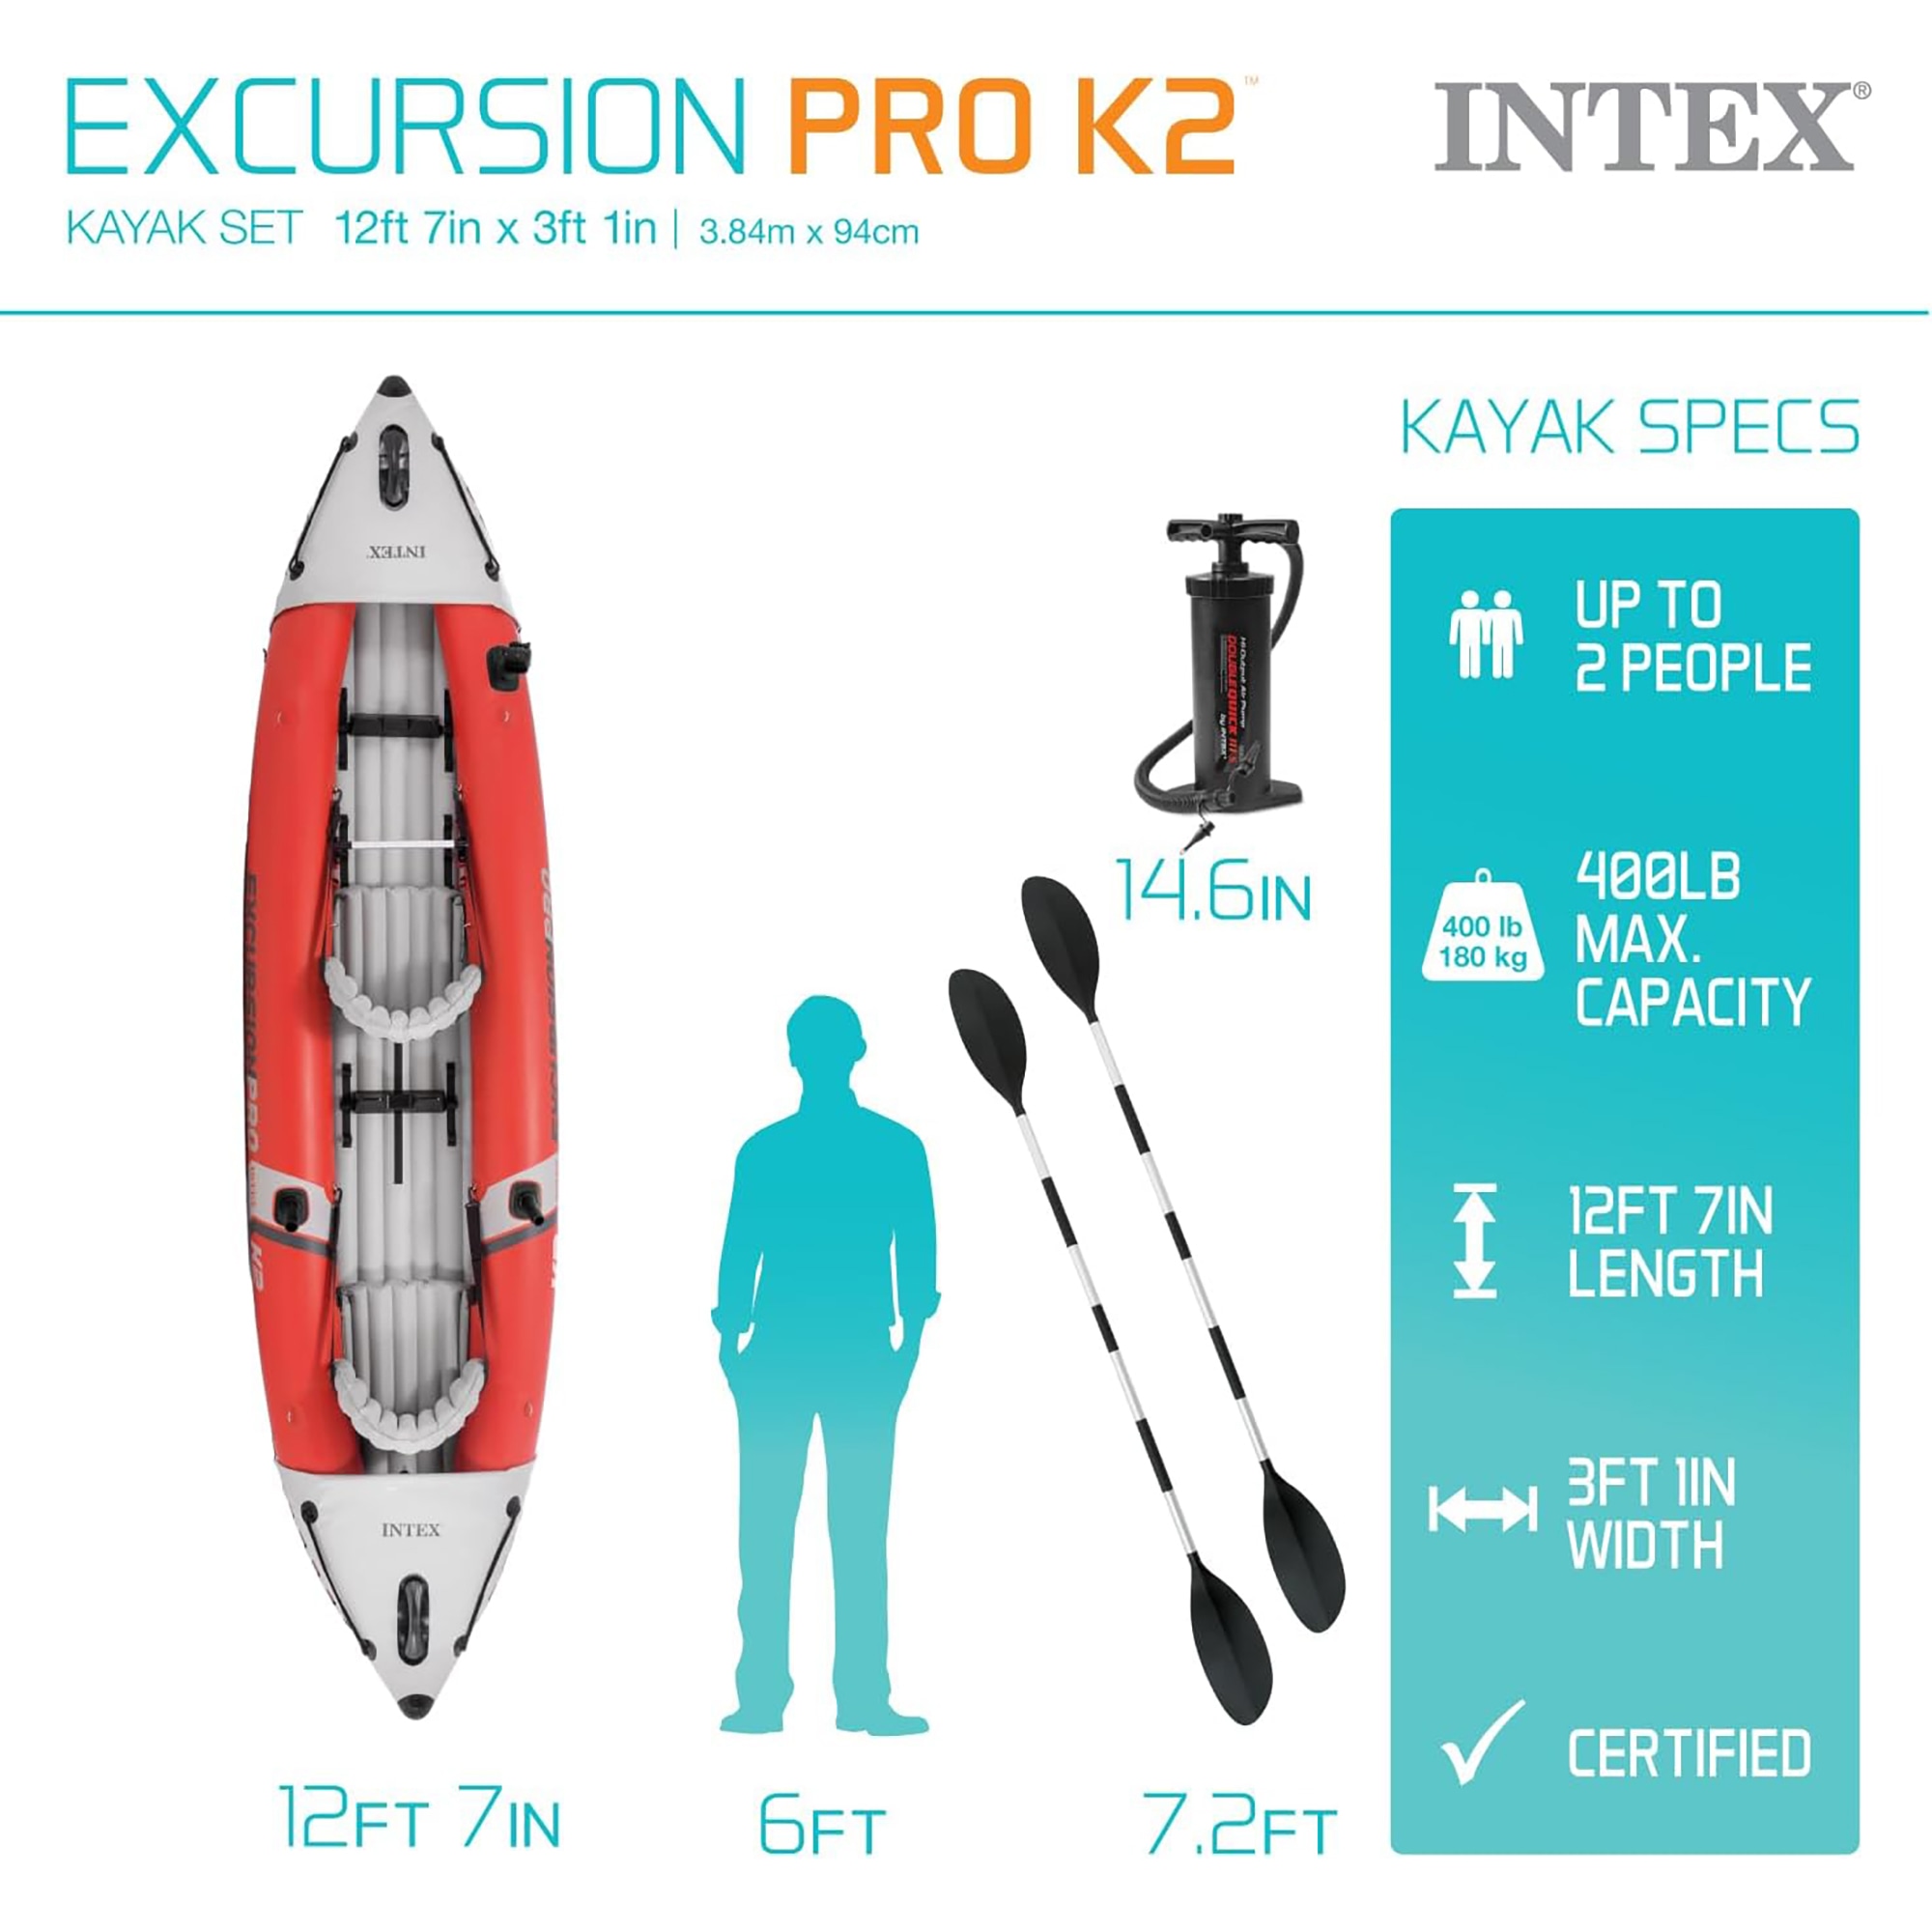 Excursion Pro 151 x 37 x 18" K2 Inflatable Kayak W/ Aluminum Oars, Pump, Fishing Rod Holders, Carry Bag - image 3 of 13